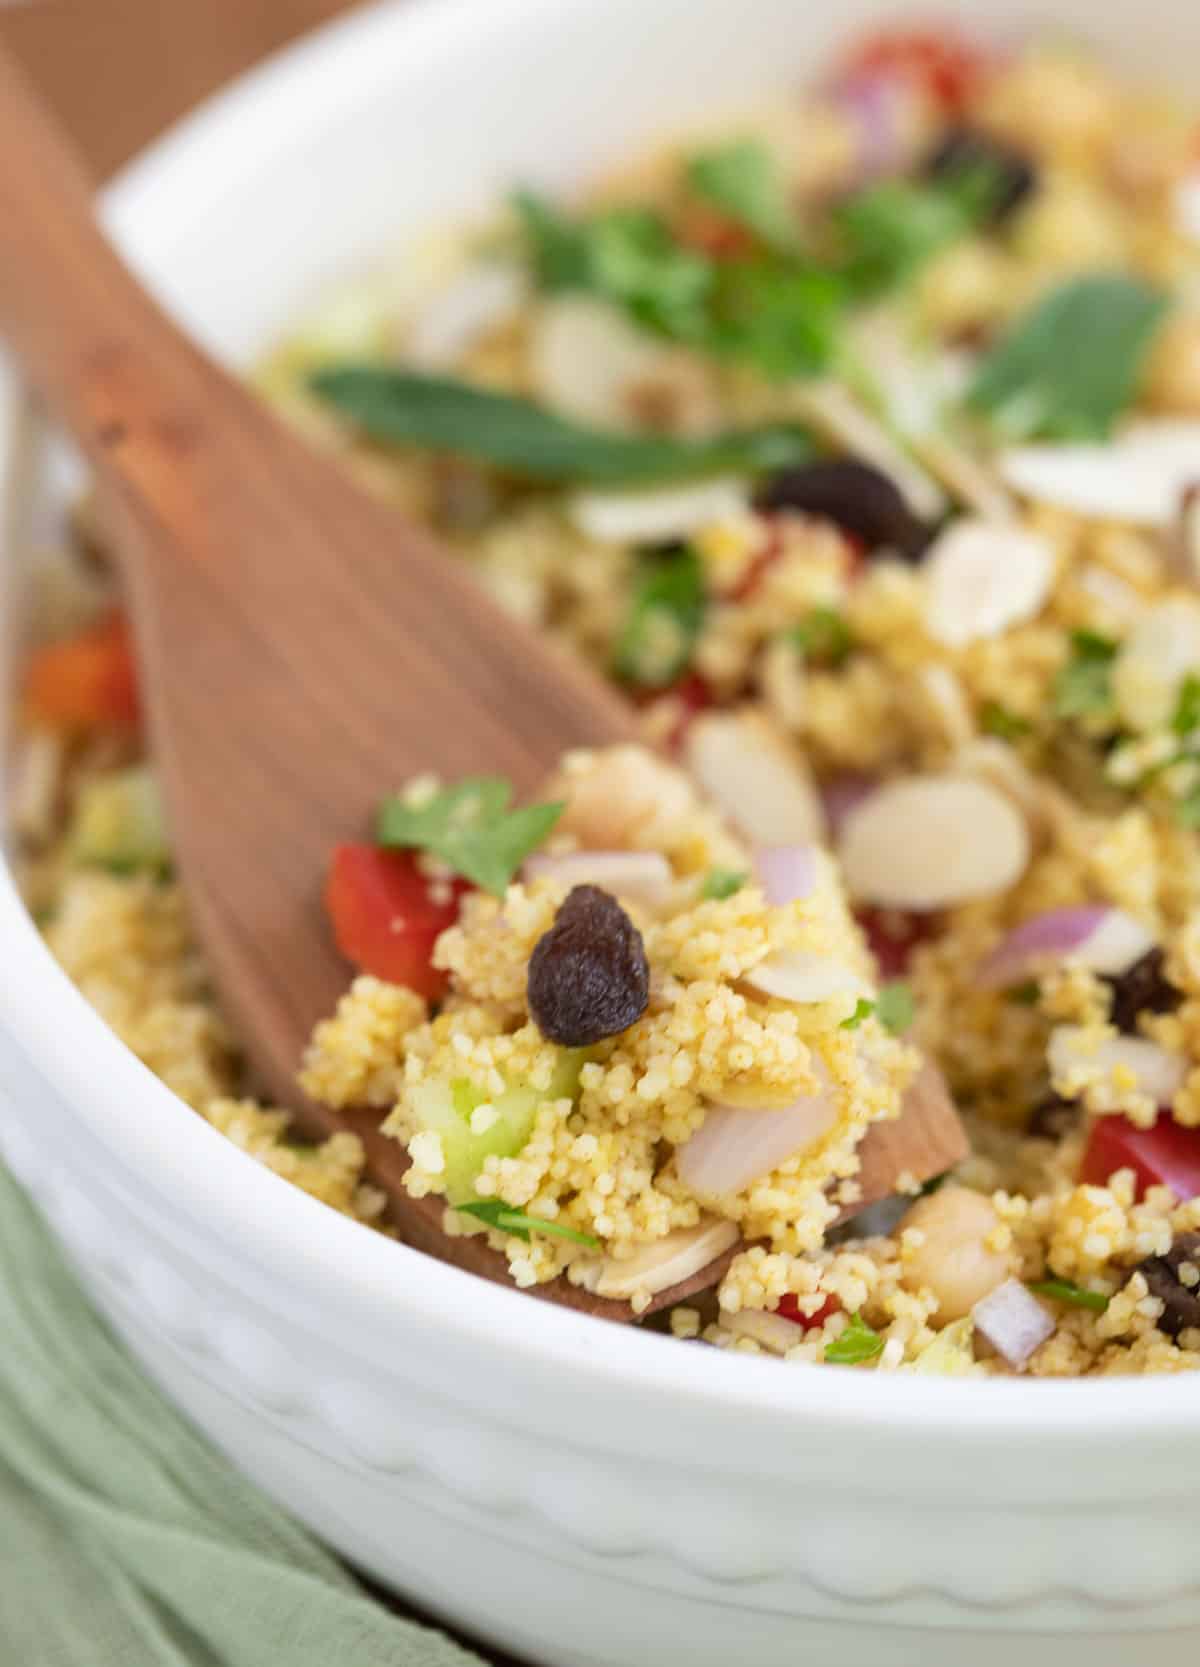 Couscous salad served with spoon.